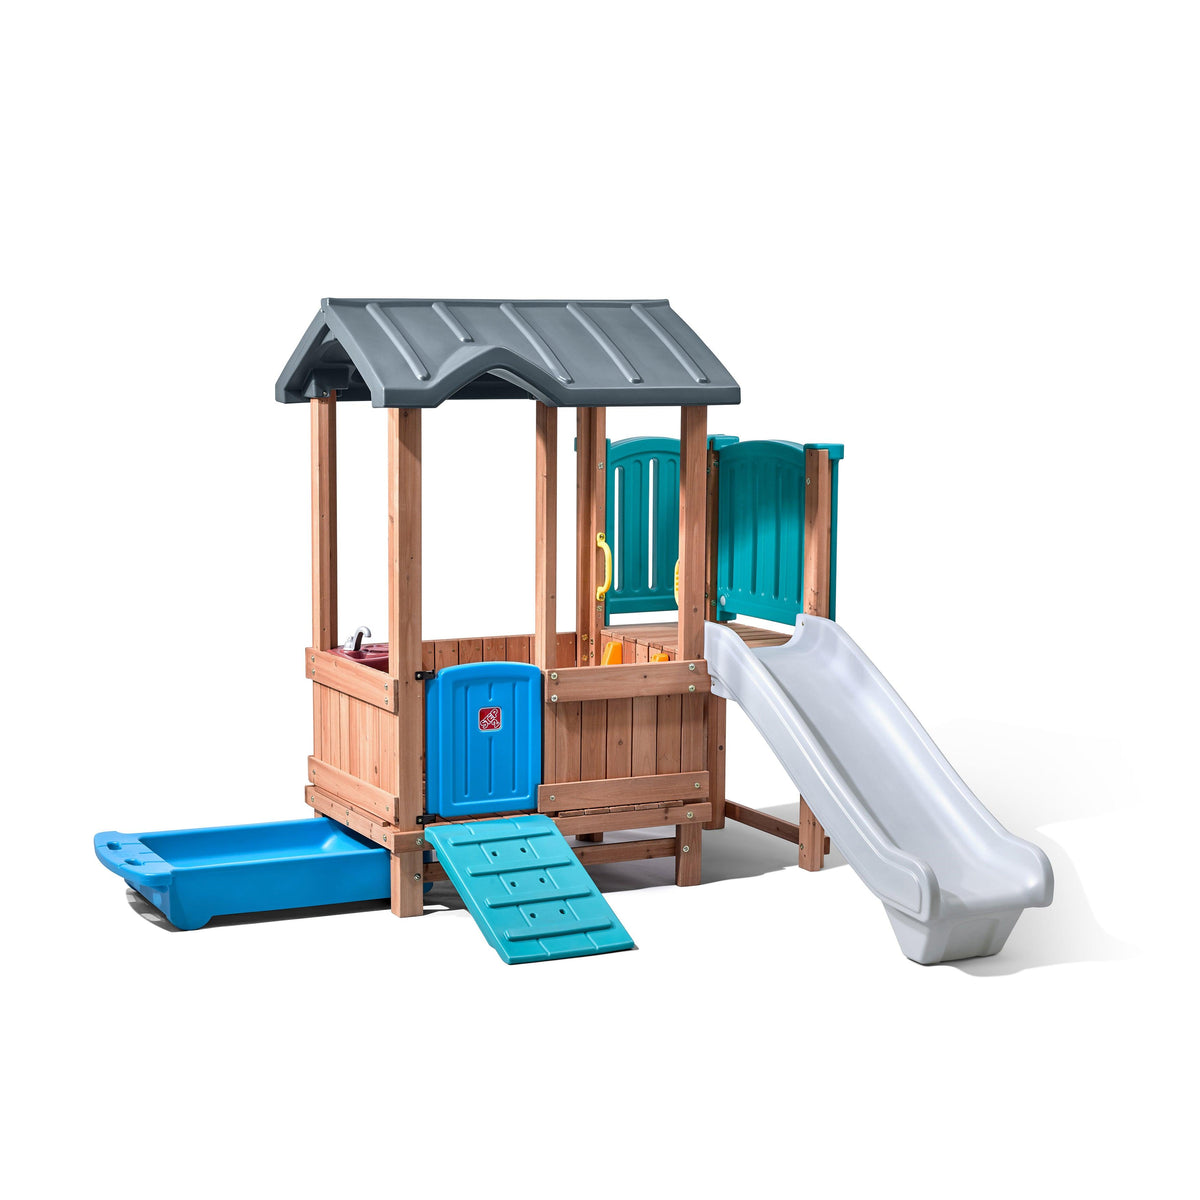 Step2 Woodland Adventure Playhouse Wooden Playset with Slide for Kids, Brown - FunCorp India